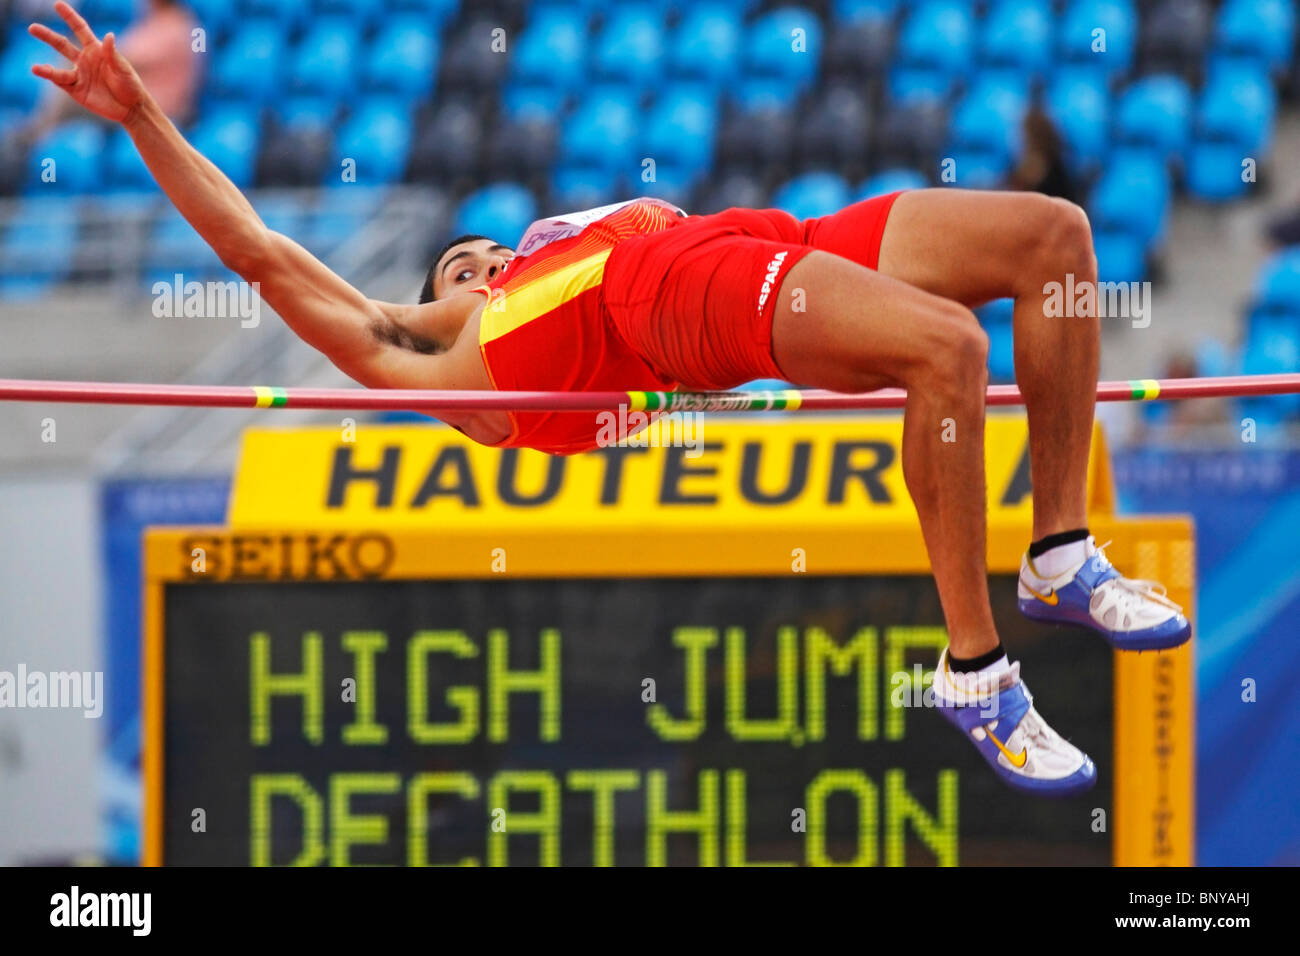 Jonay Jordan of Spain does the high jump as part of the decathlon at the 2010 IAAF World Junior Championships on July 20, 2010. Stock Photo